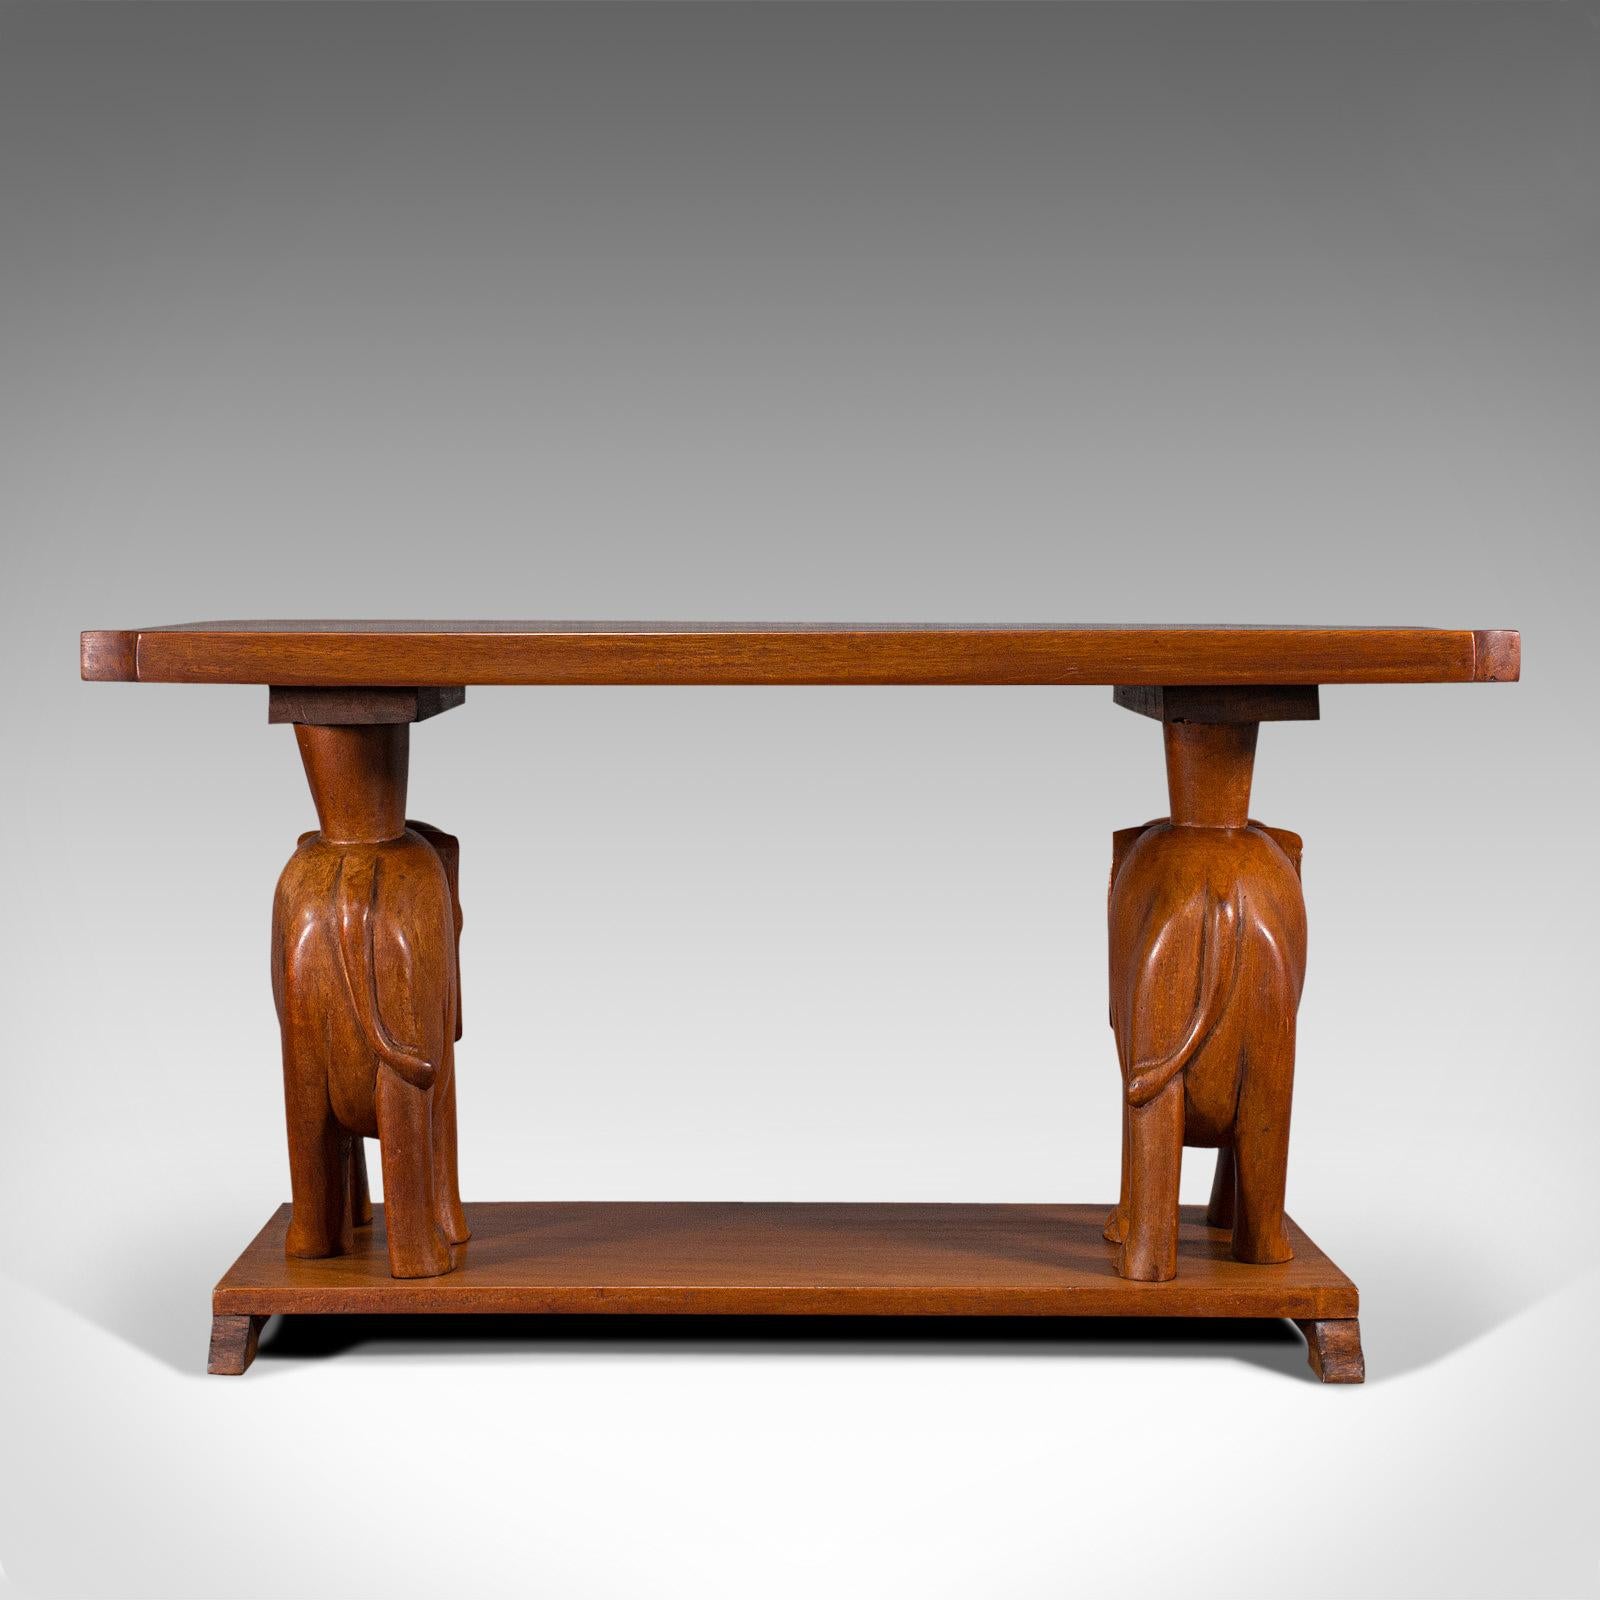 Vintage Decorative Coffee Table, Asian, Mahogany, Side, Elephants, Art Deco In Good Condition For Sale In Hele, Devon, GB